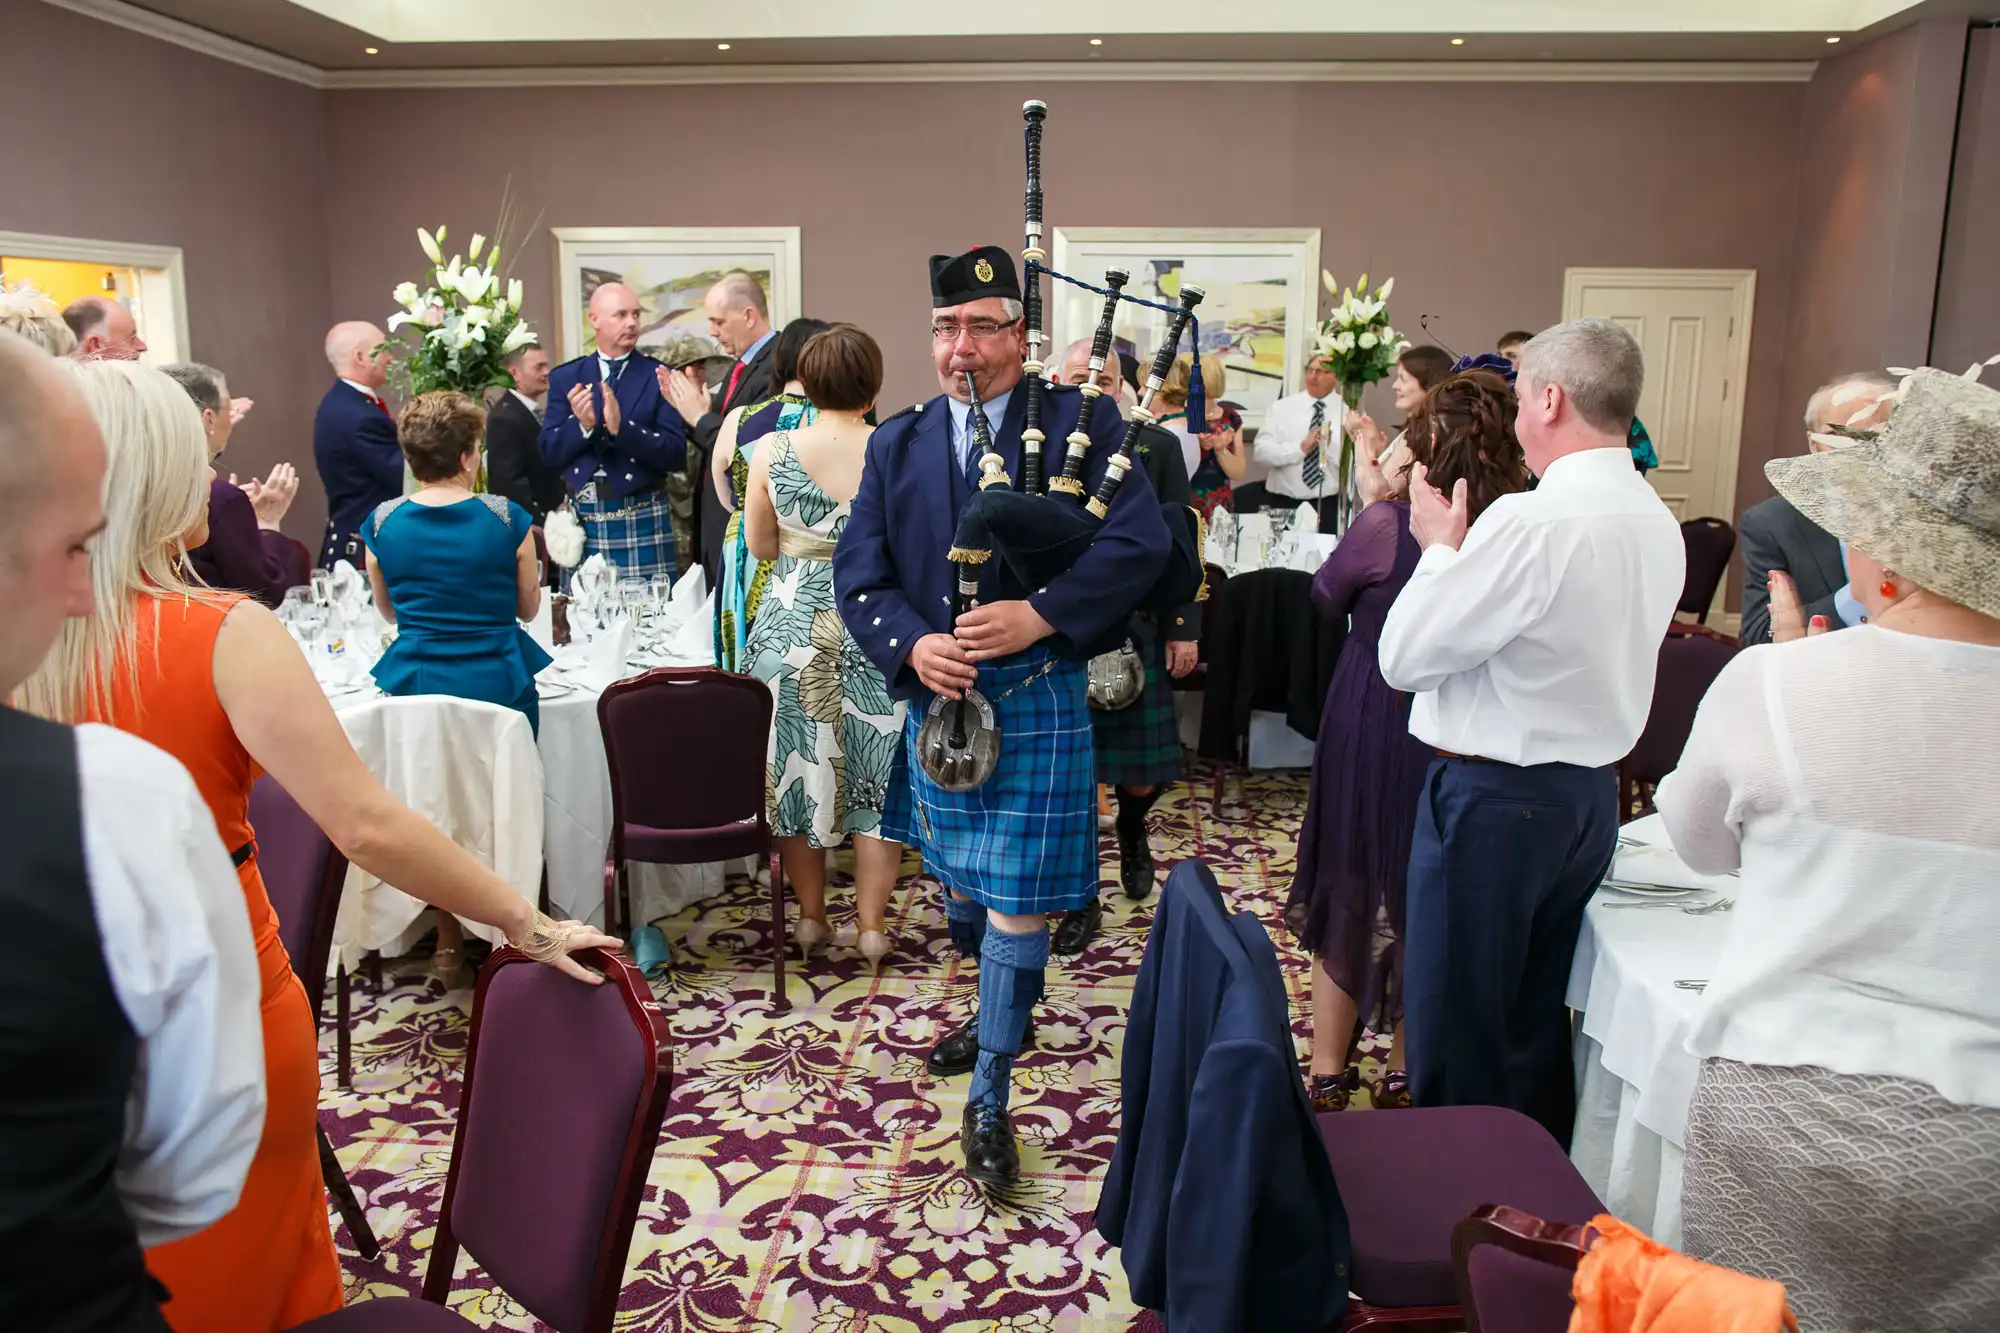 A bagpiper in traditional scottish attire performing at a wedding reception with guests clapping and observing.